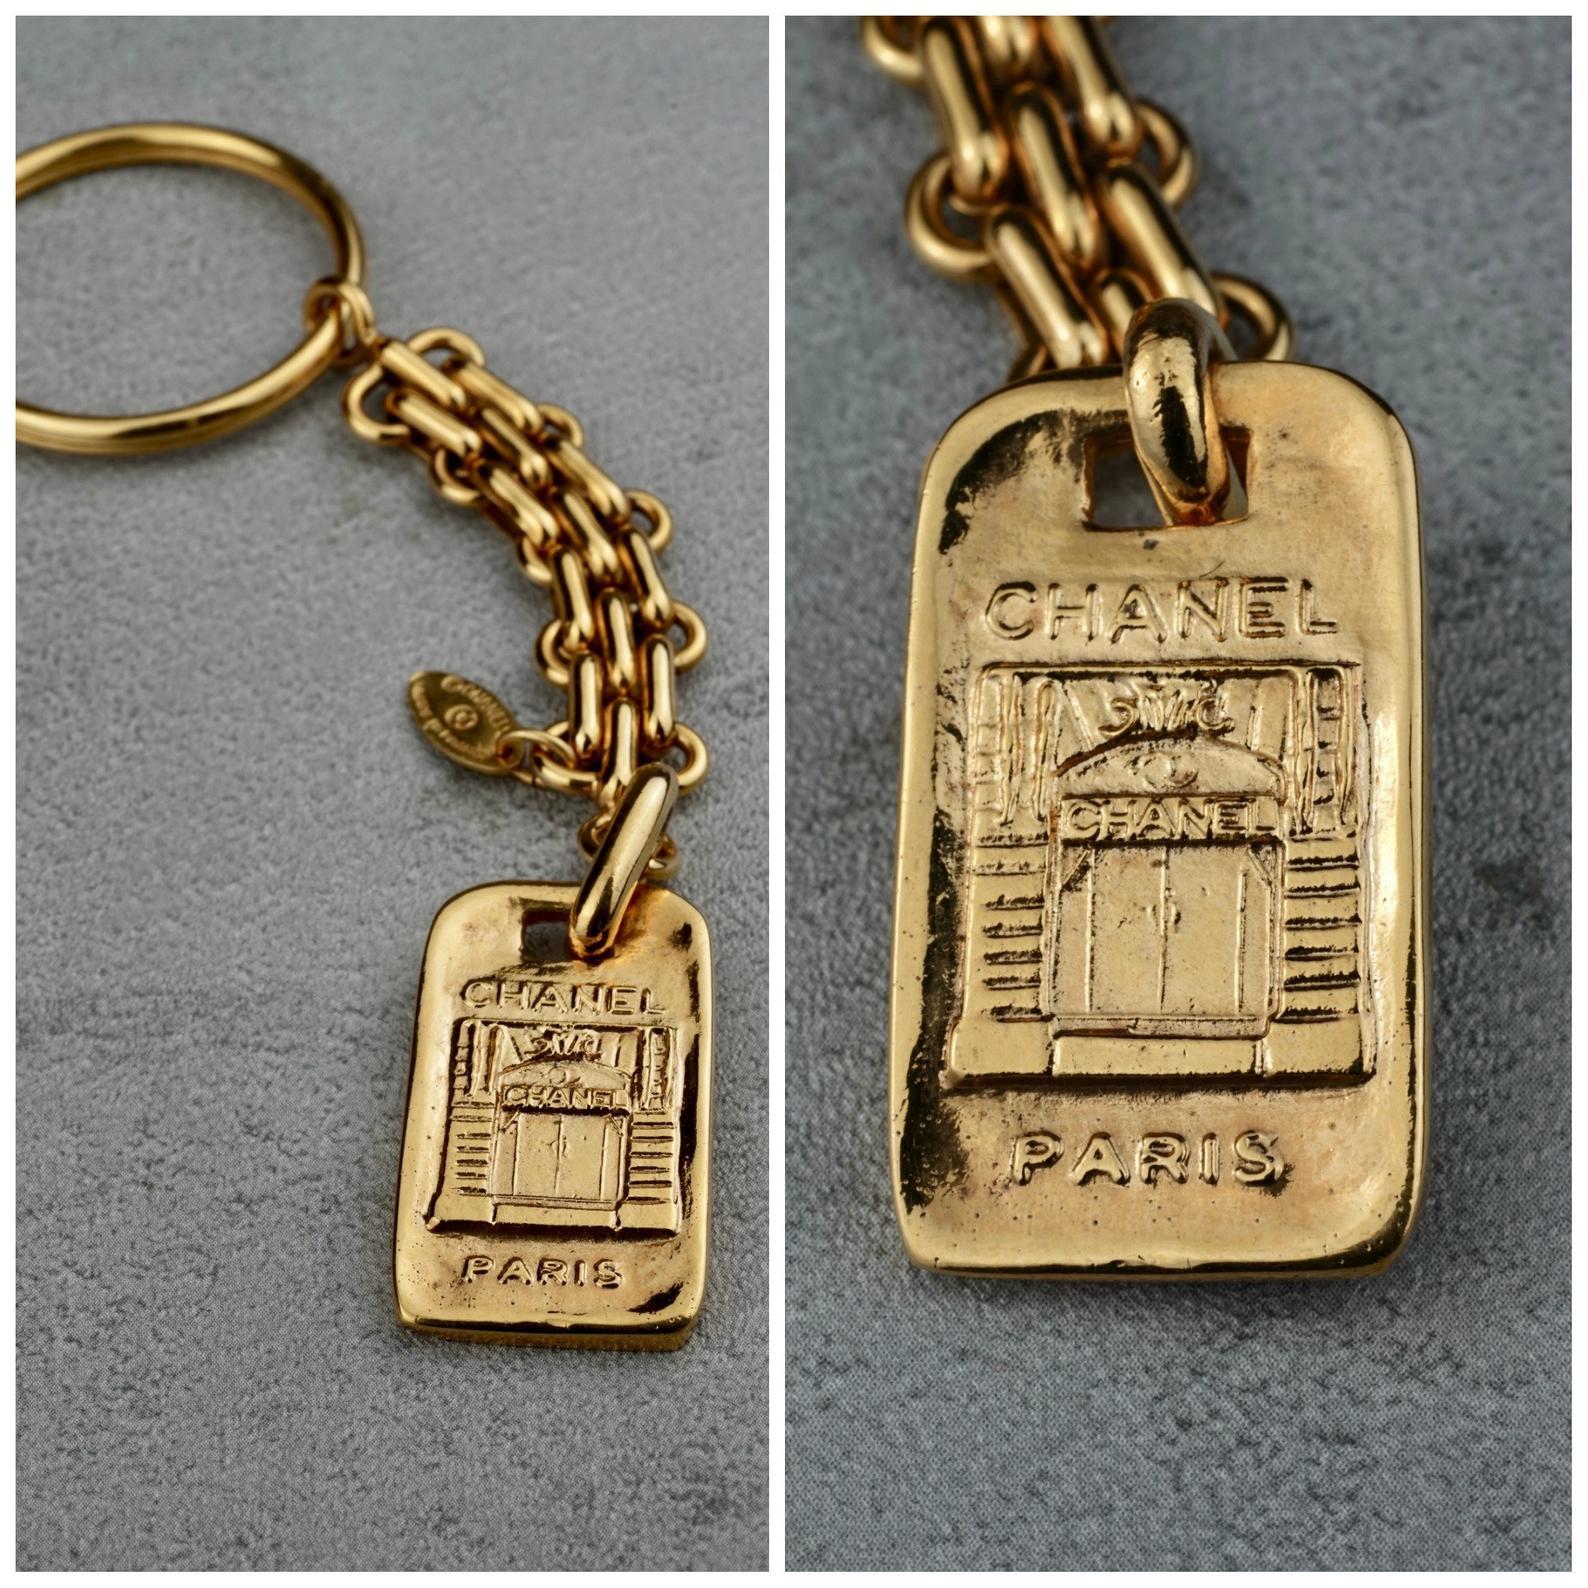 Vintage CHANEL Iconic Door Keychain

Measurements:
Height: 1.38 inches (3.5 cm)
Width: 0.78 inch (2 cm)
Length: 5.31 inches (13.5 cm)

Features:
- 100% Authentic CHANEL.
- Iconic CHANEL Door keychain.
- Gold tone hardware.
- Signed Chanel Made in